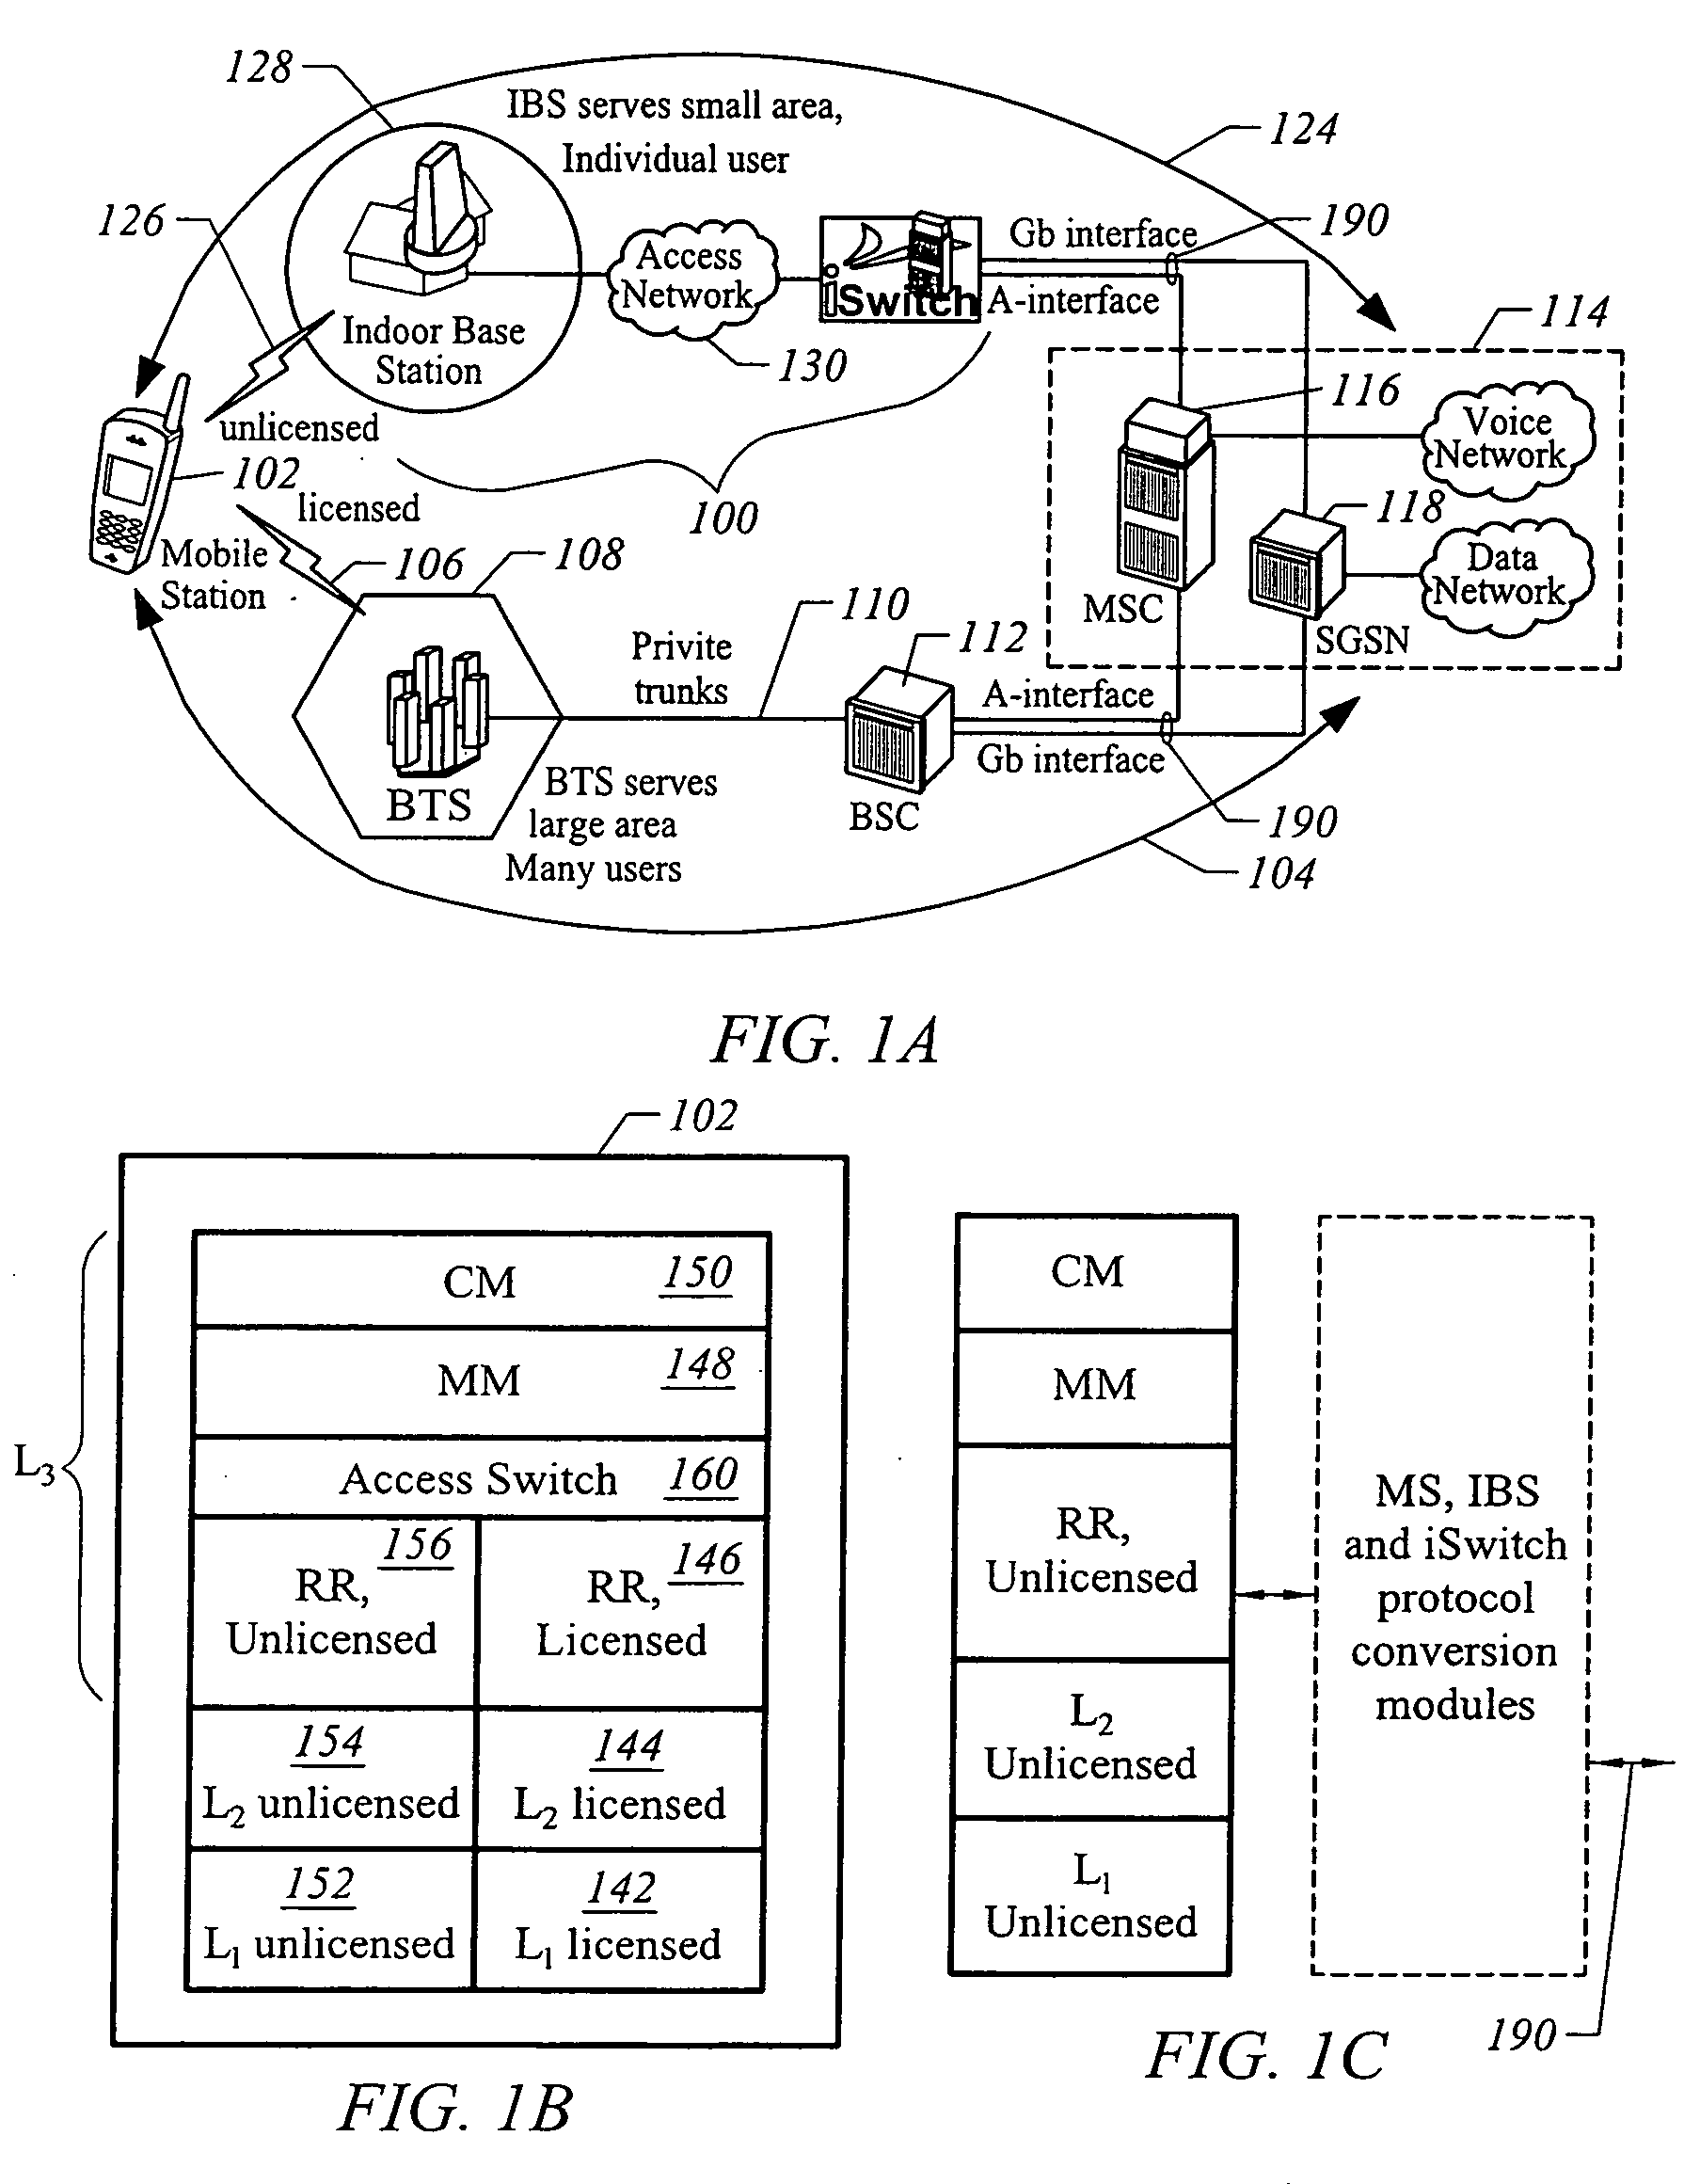 GSM signaling protocol architecture for an unlicensed wireless communication system